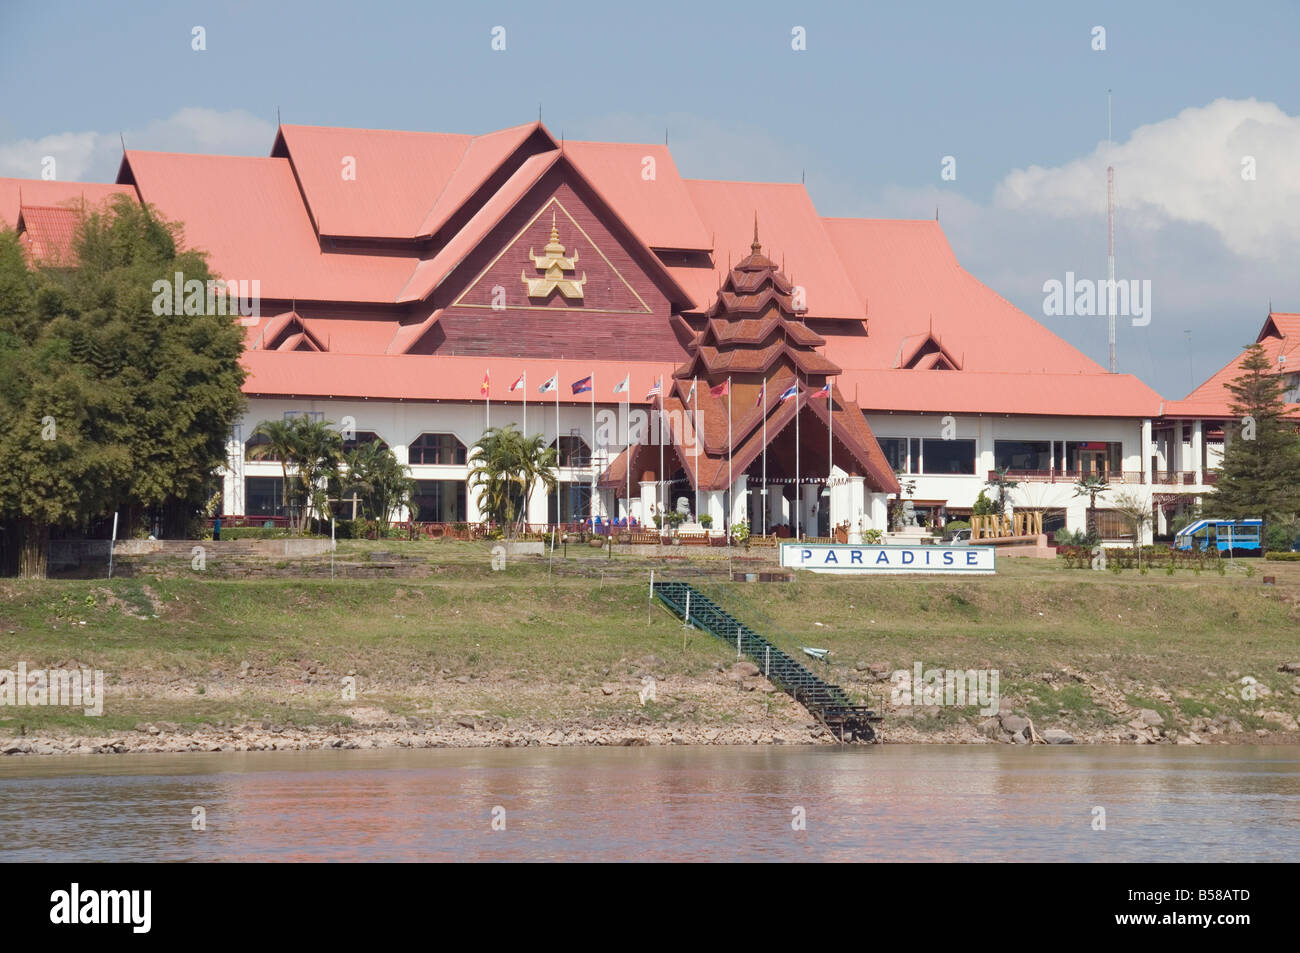 Casino on the Mekong River in Burma just a short boat trip from Thailand, where gambling is illegal, Myanmar (Burma) Stock Photo